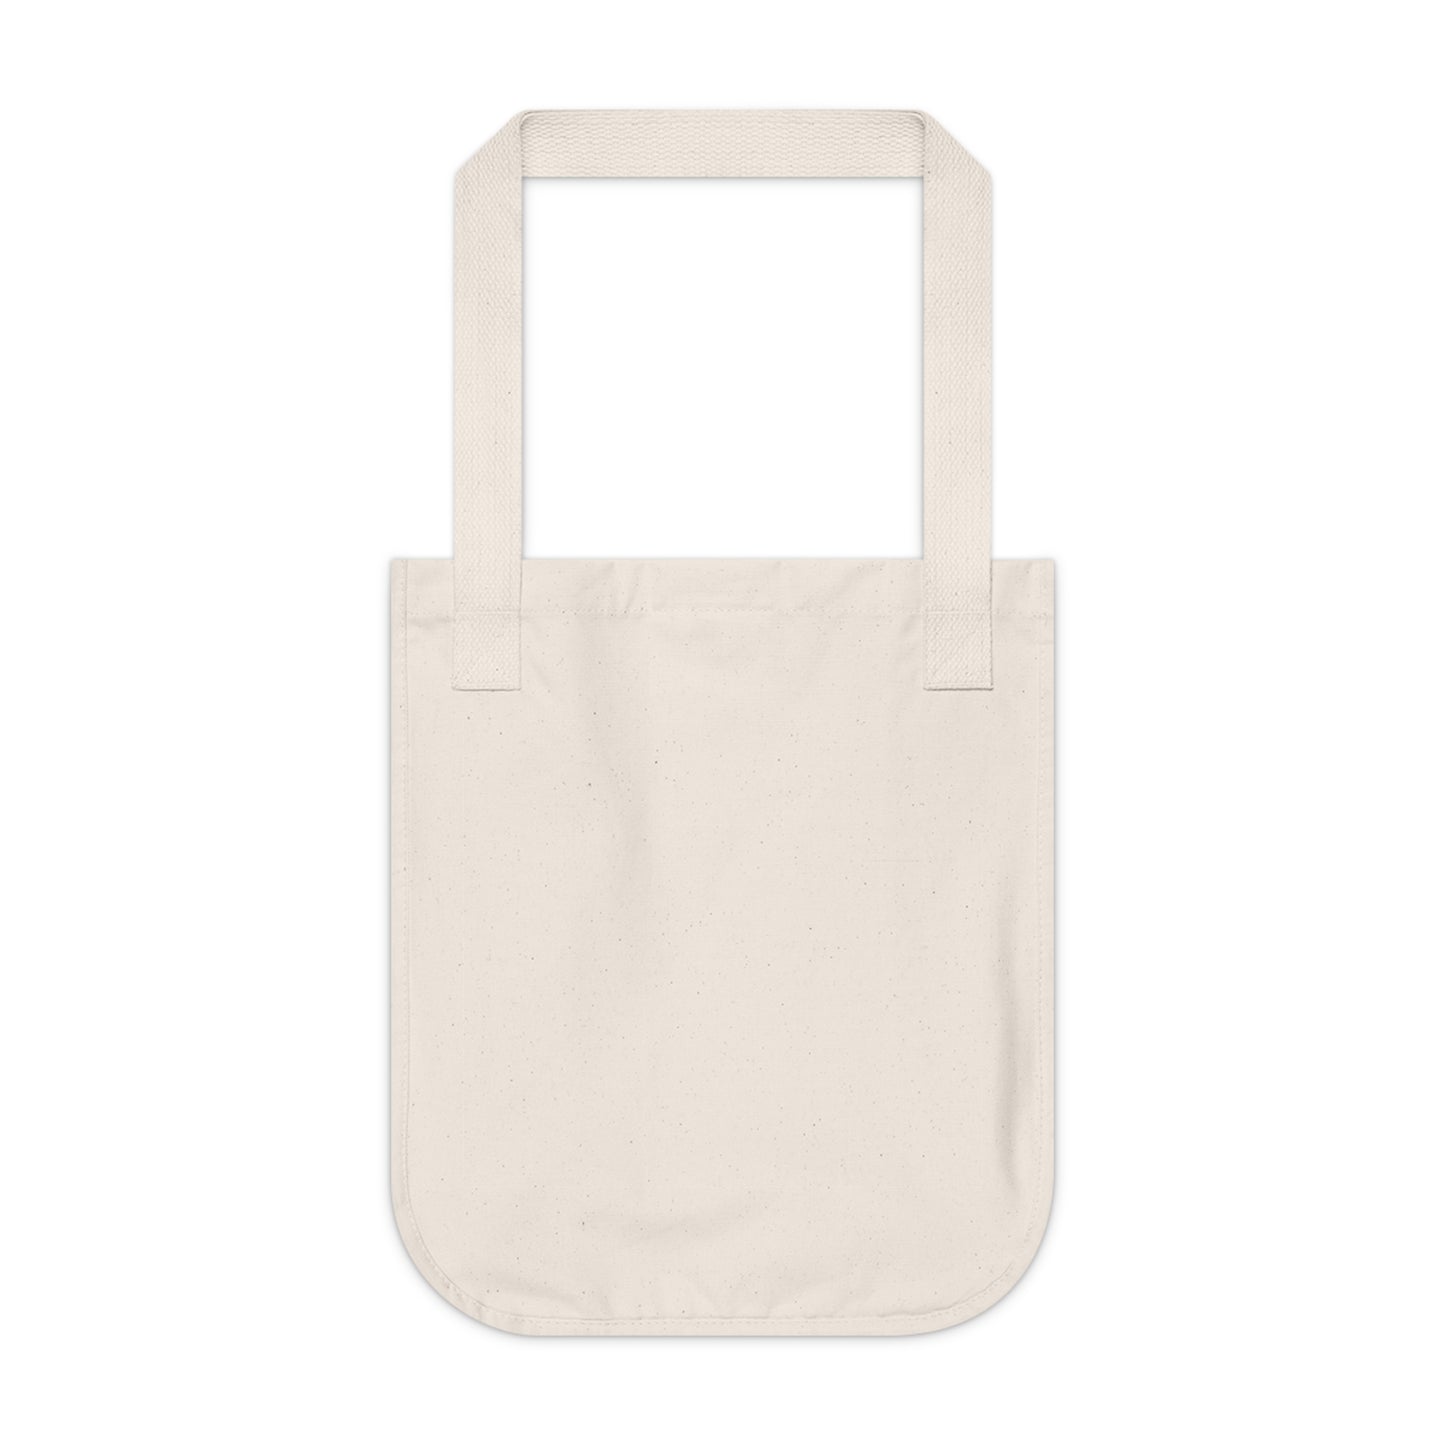 "Exploring the World Through the Lens of Me" - Bam Boo! Lifestyle Eco-friendly Tote Bag